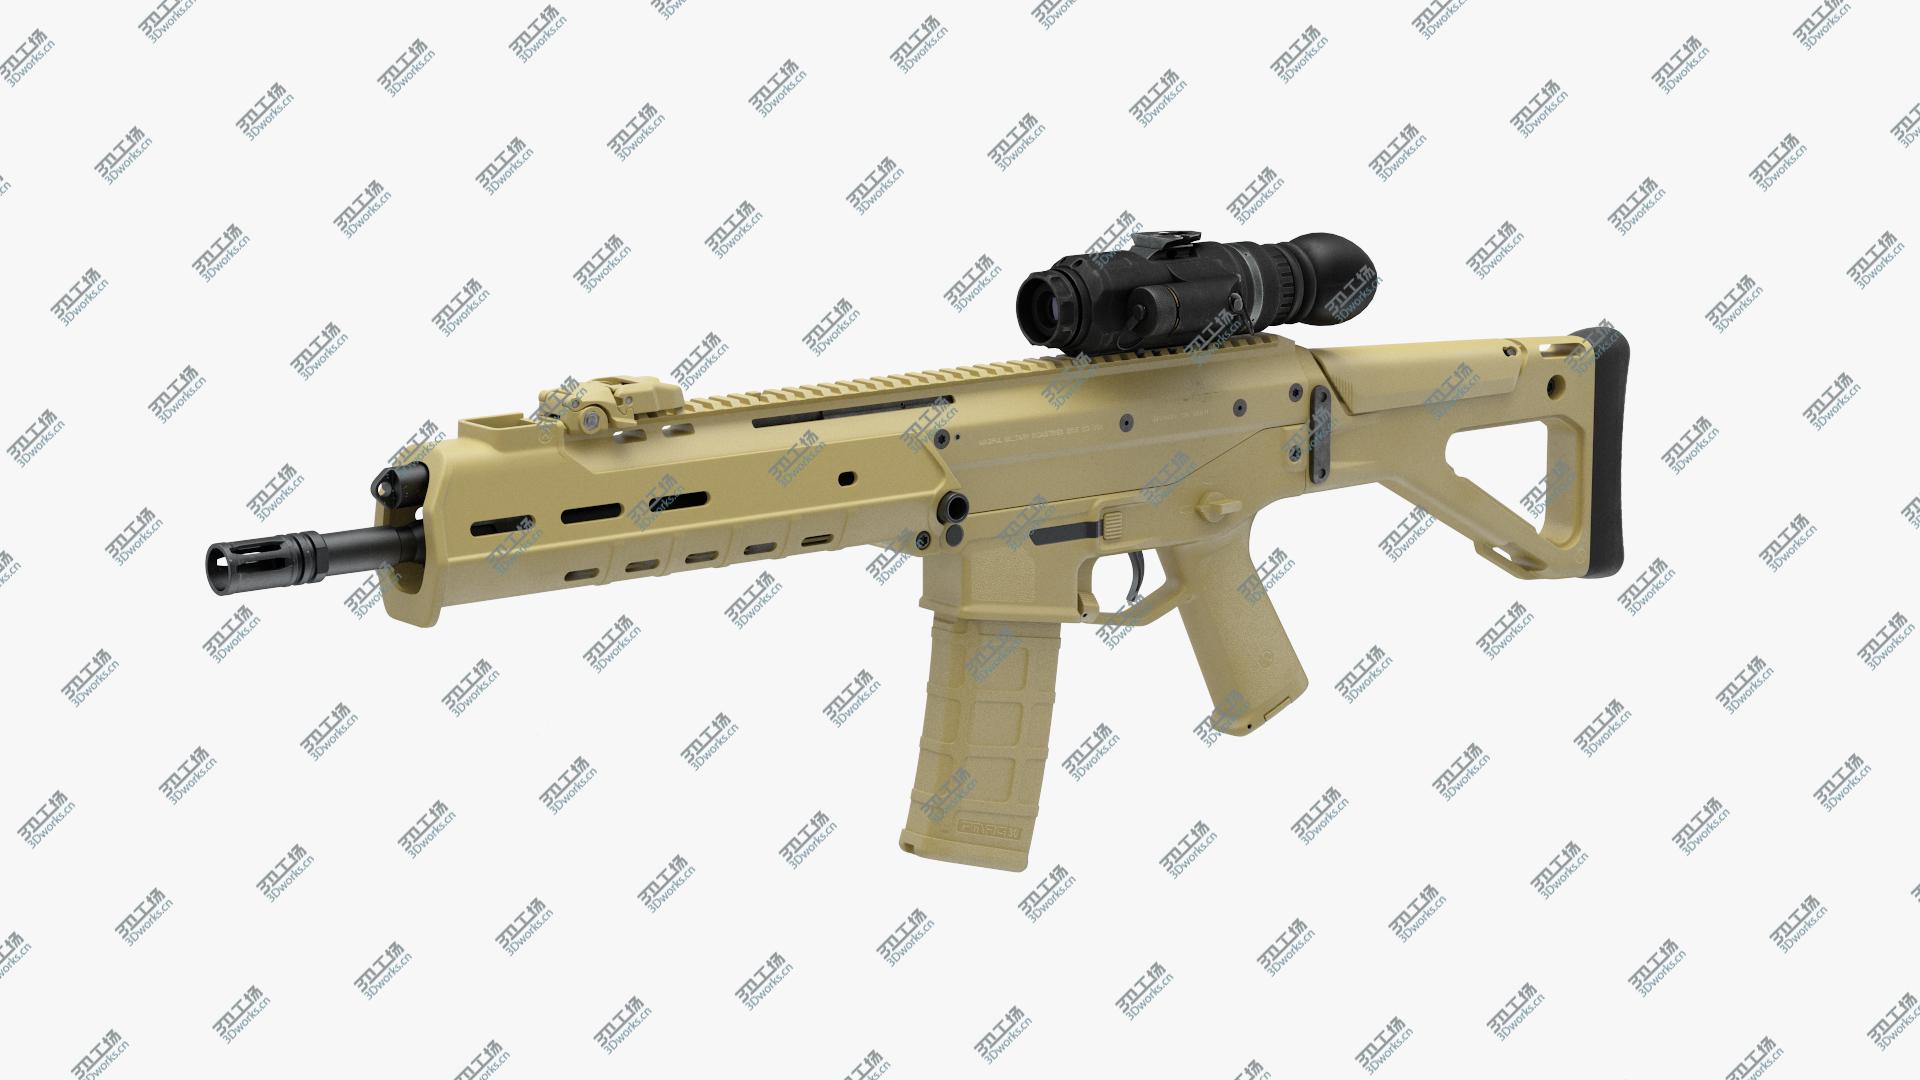 images/goods_img/202105071/3D Combat Rifle with Thermal IR Scope/2.jpg